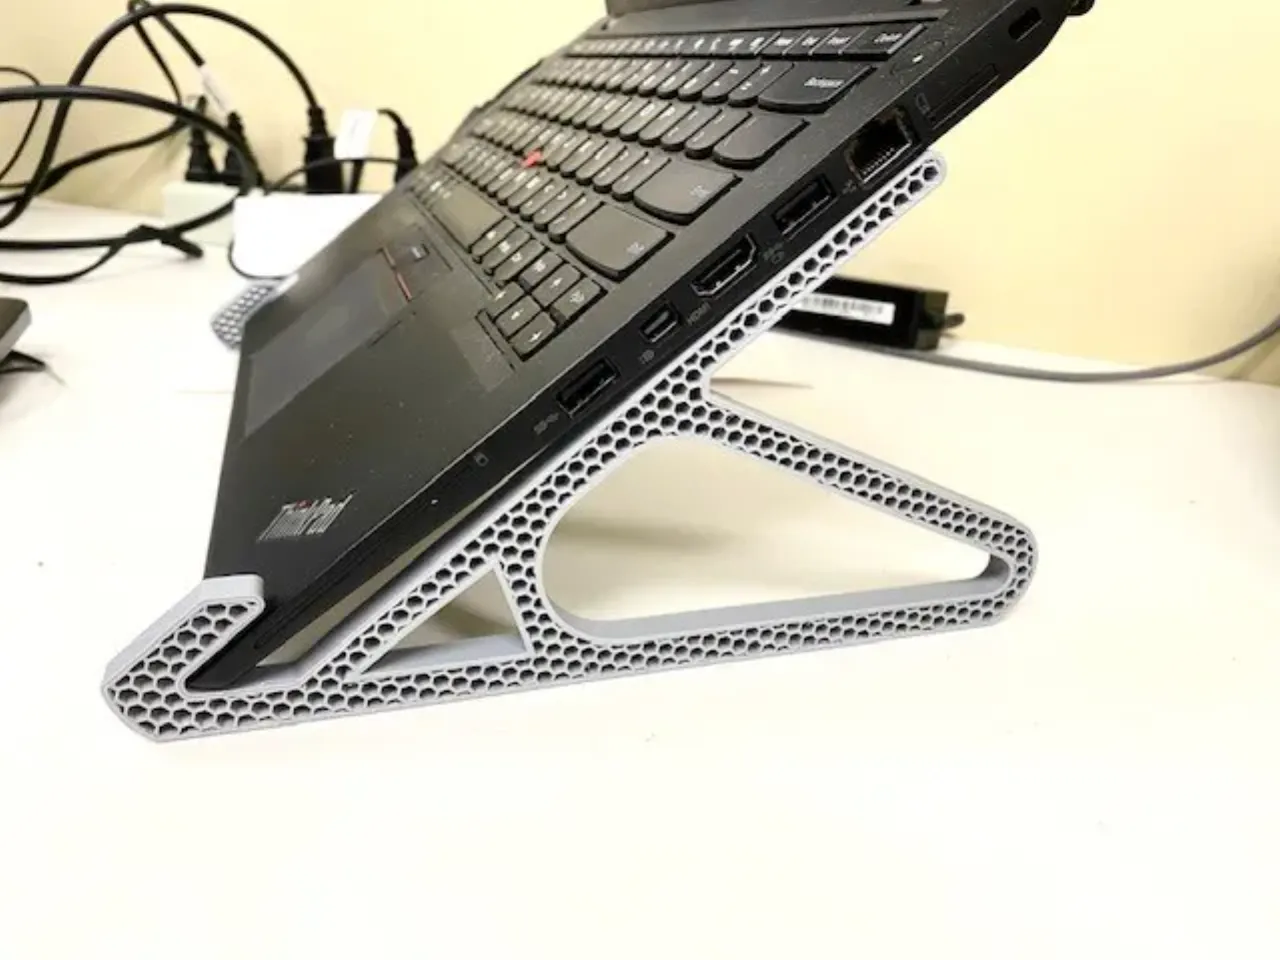 UPDATE: Angled Laptop Stand / Exended Support by BurgessG, Download free  STL model